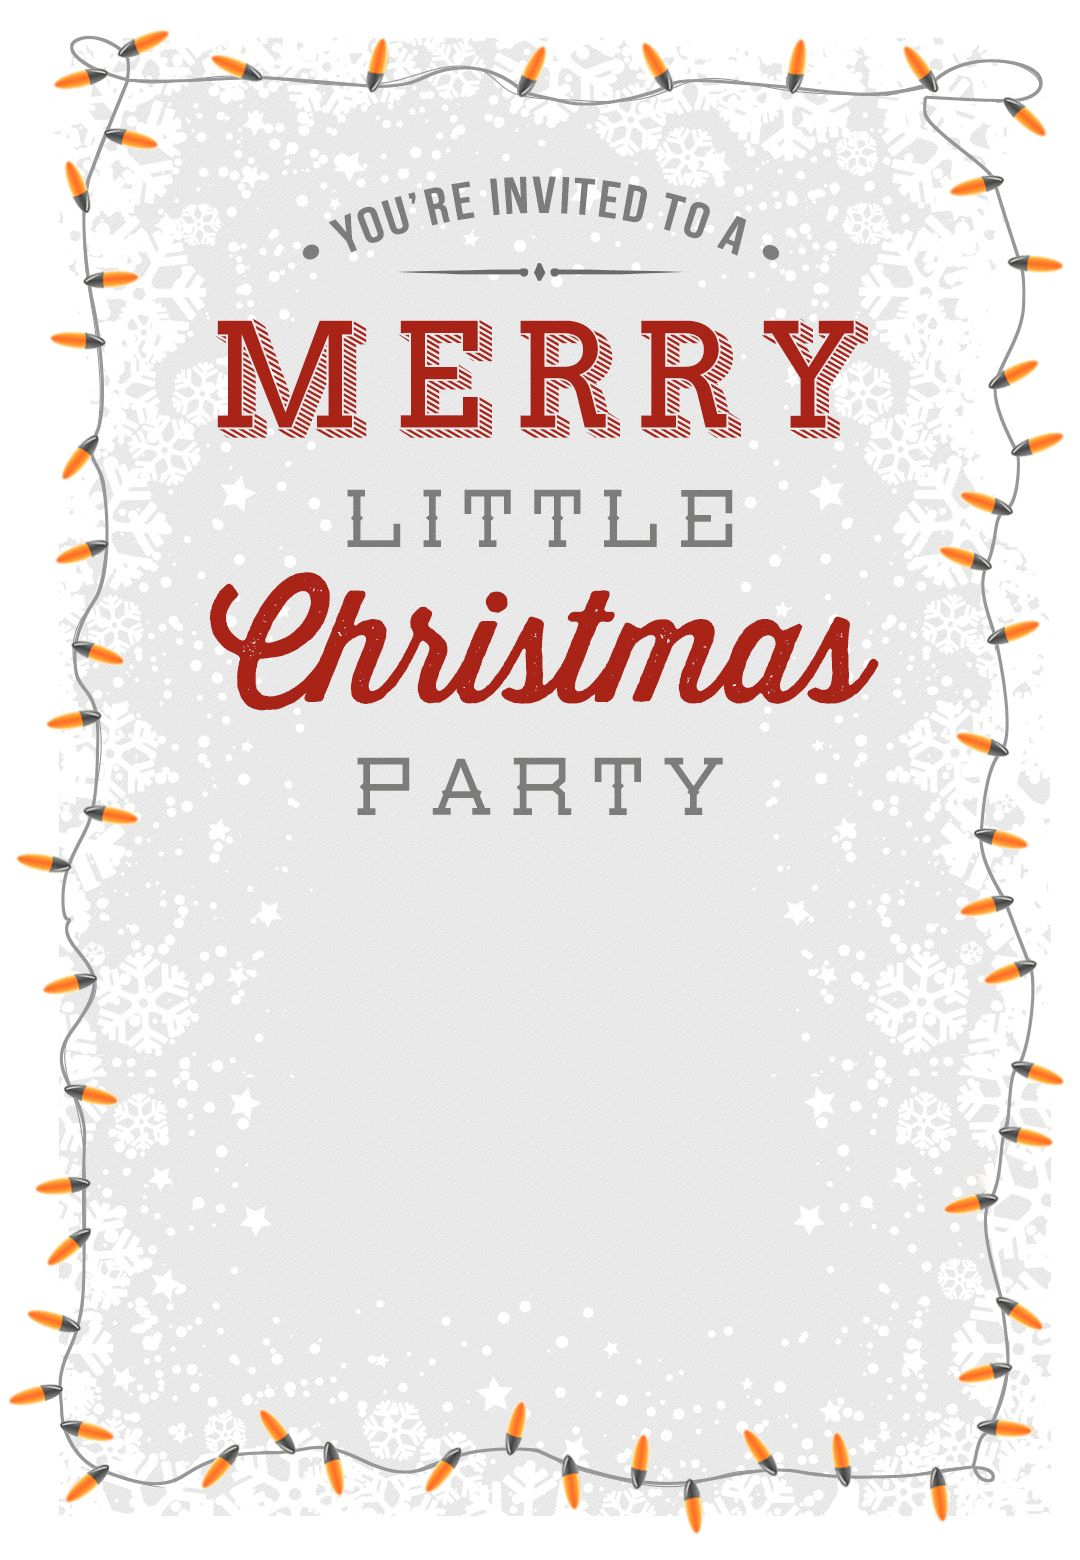 A Merry Little Party - Free Printable Christmas Invitation Template - Free Printable Christmas Invitations